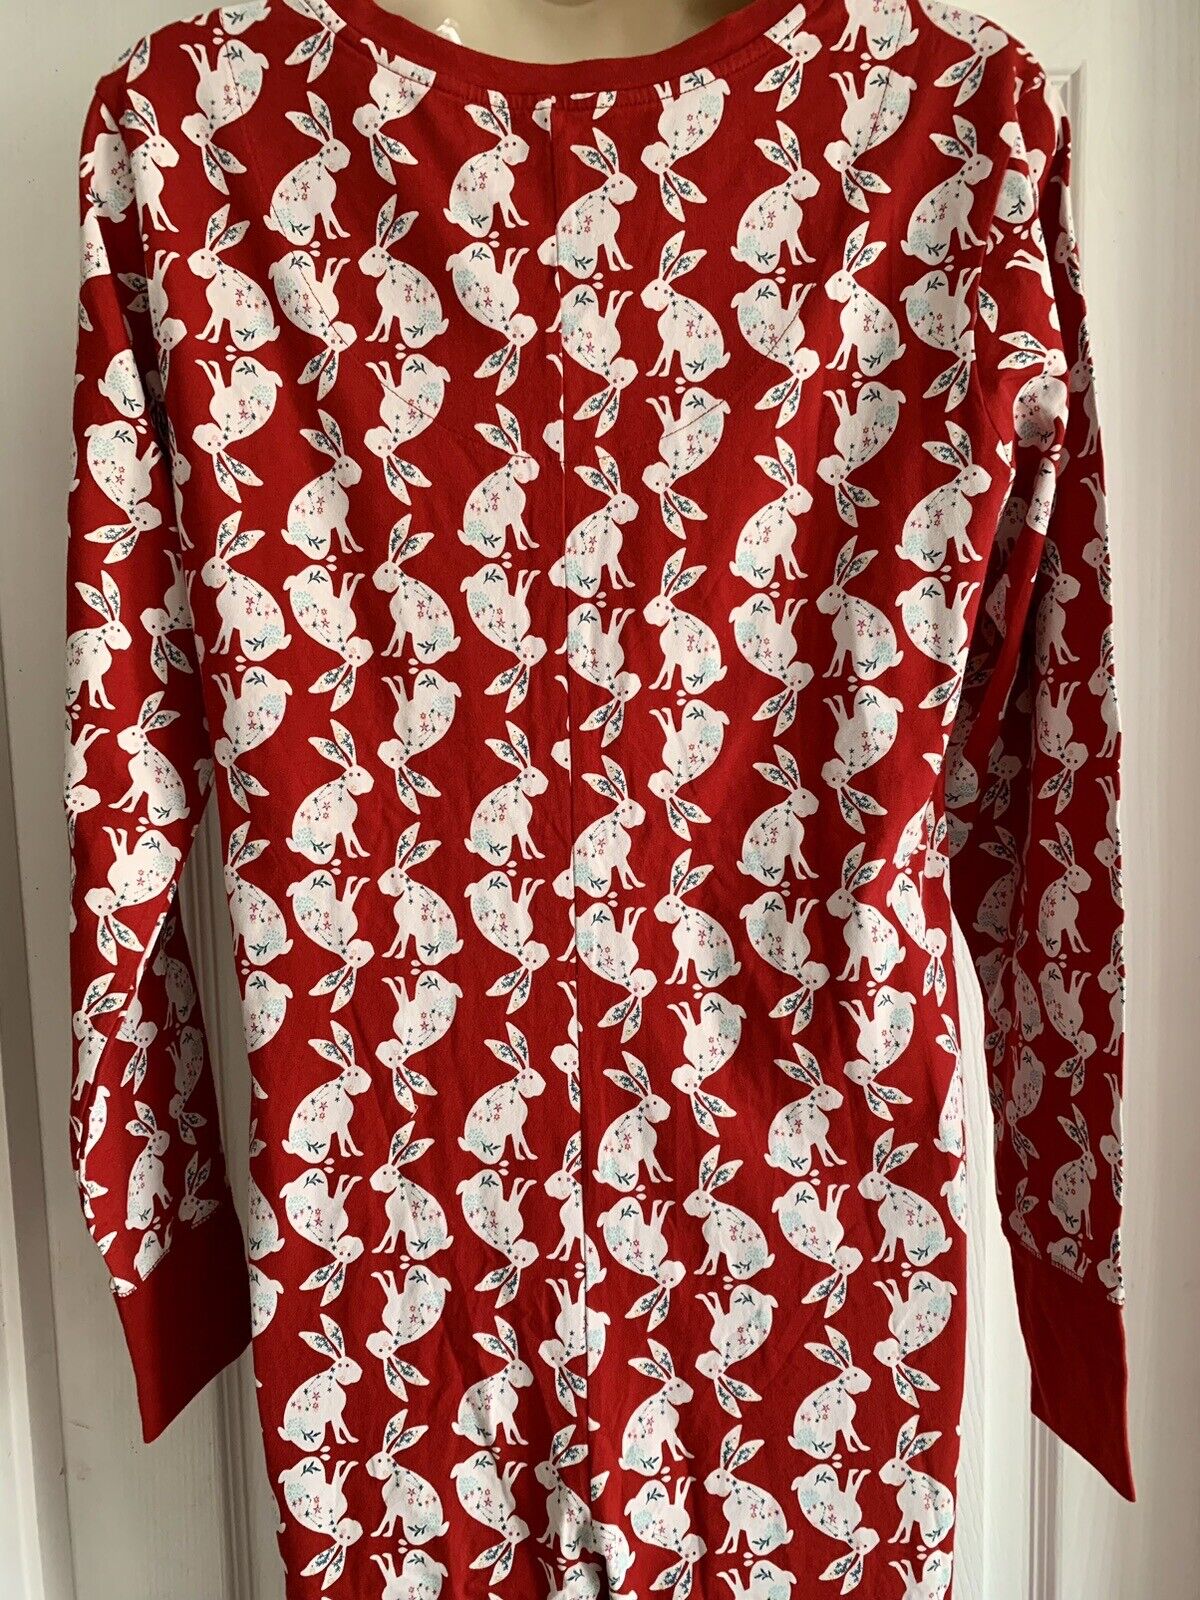 EX White Stuff Womens Red Bunny/Rabbit One Piece All in One Sizes S, M, L